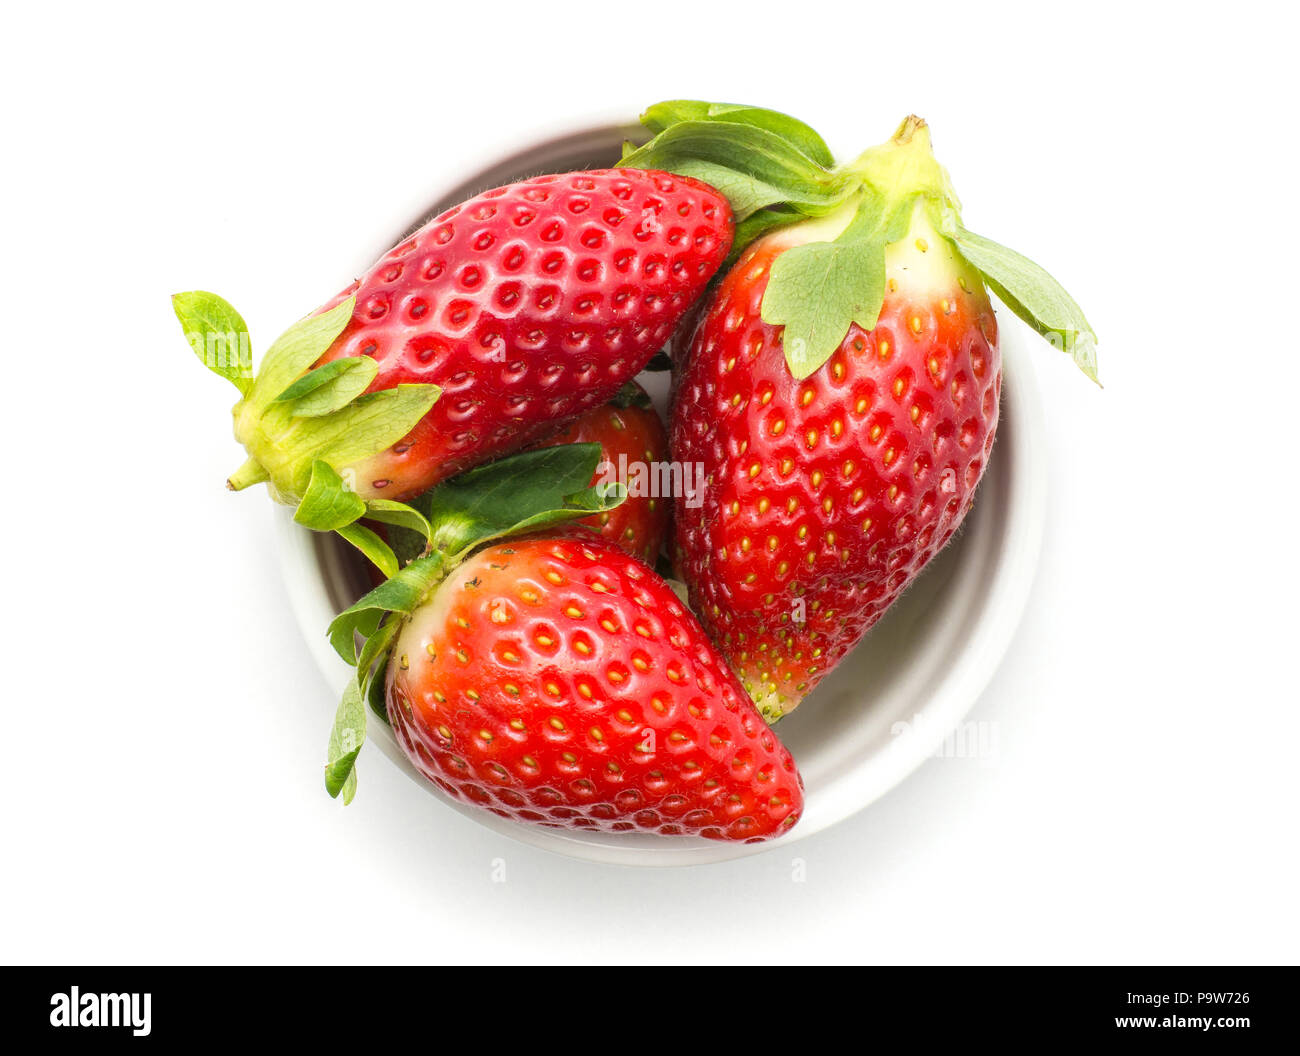 Garden strawberries in a ceramic top view isolated on white background ideal breakfast Stock Photo